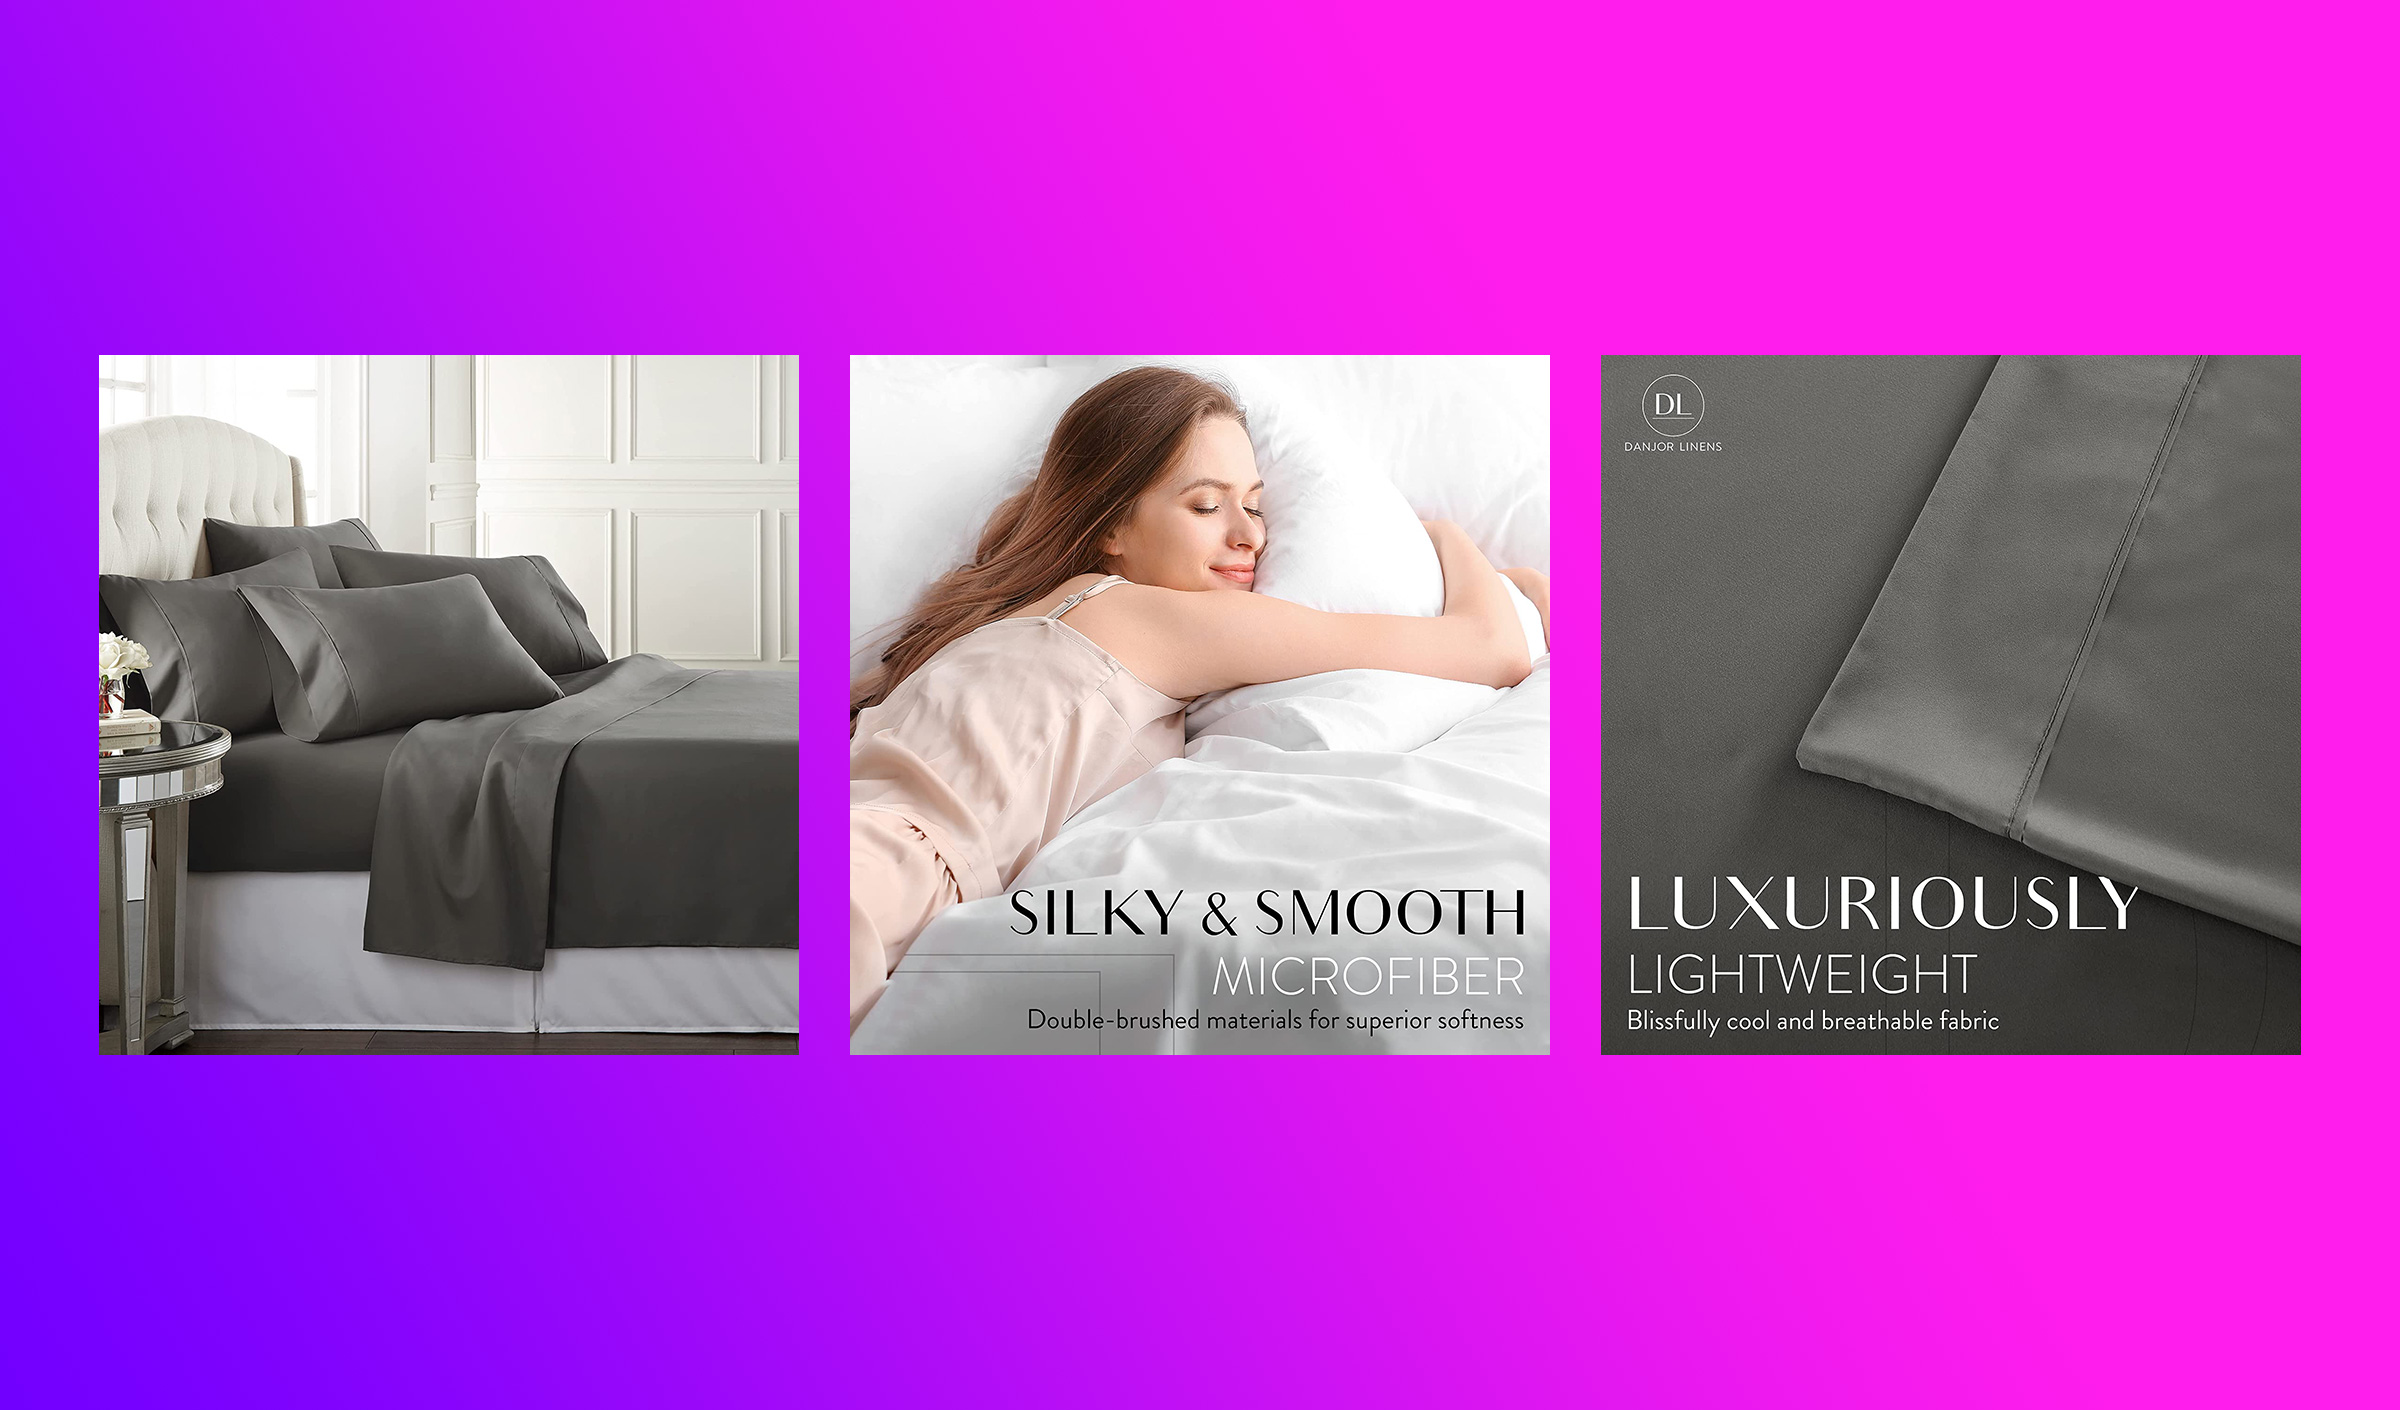 Reviewers Love This $16 Bedding Because It's 'so Soft and Smooth